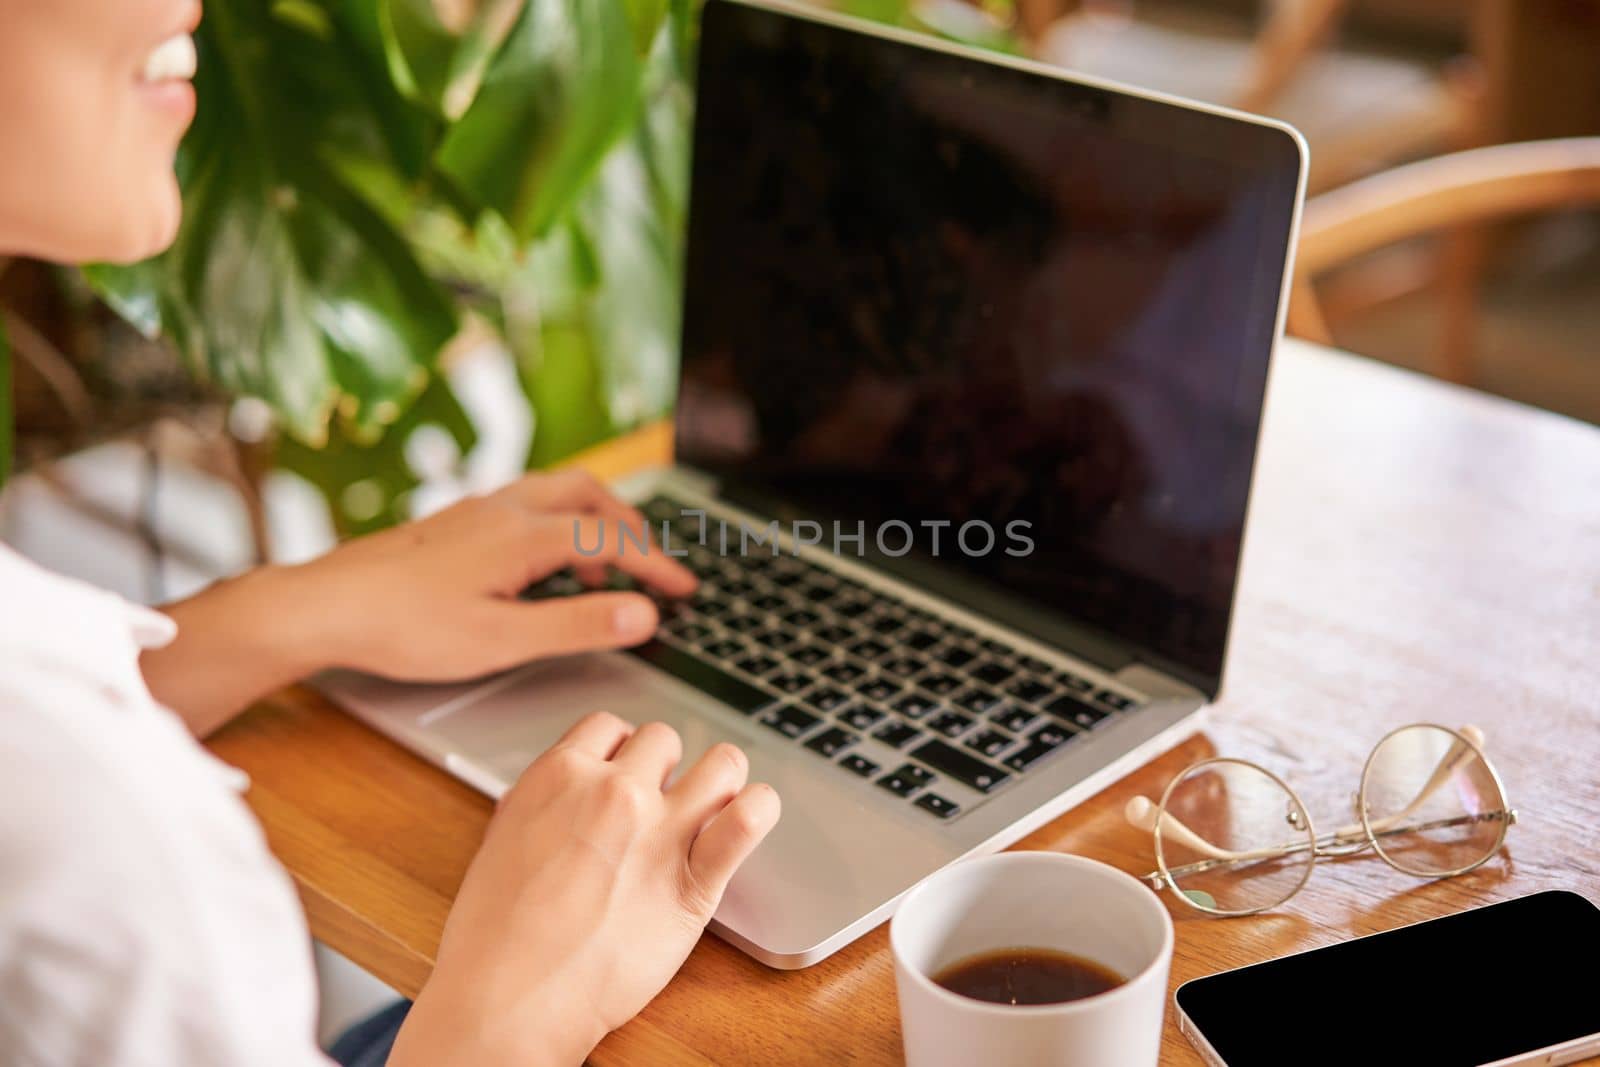 Cropped shot of laptop screen and female hands typing, cafe interior and cup of coffee with glasses on table.